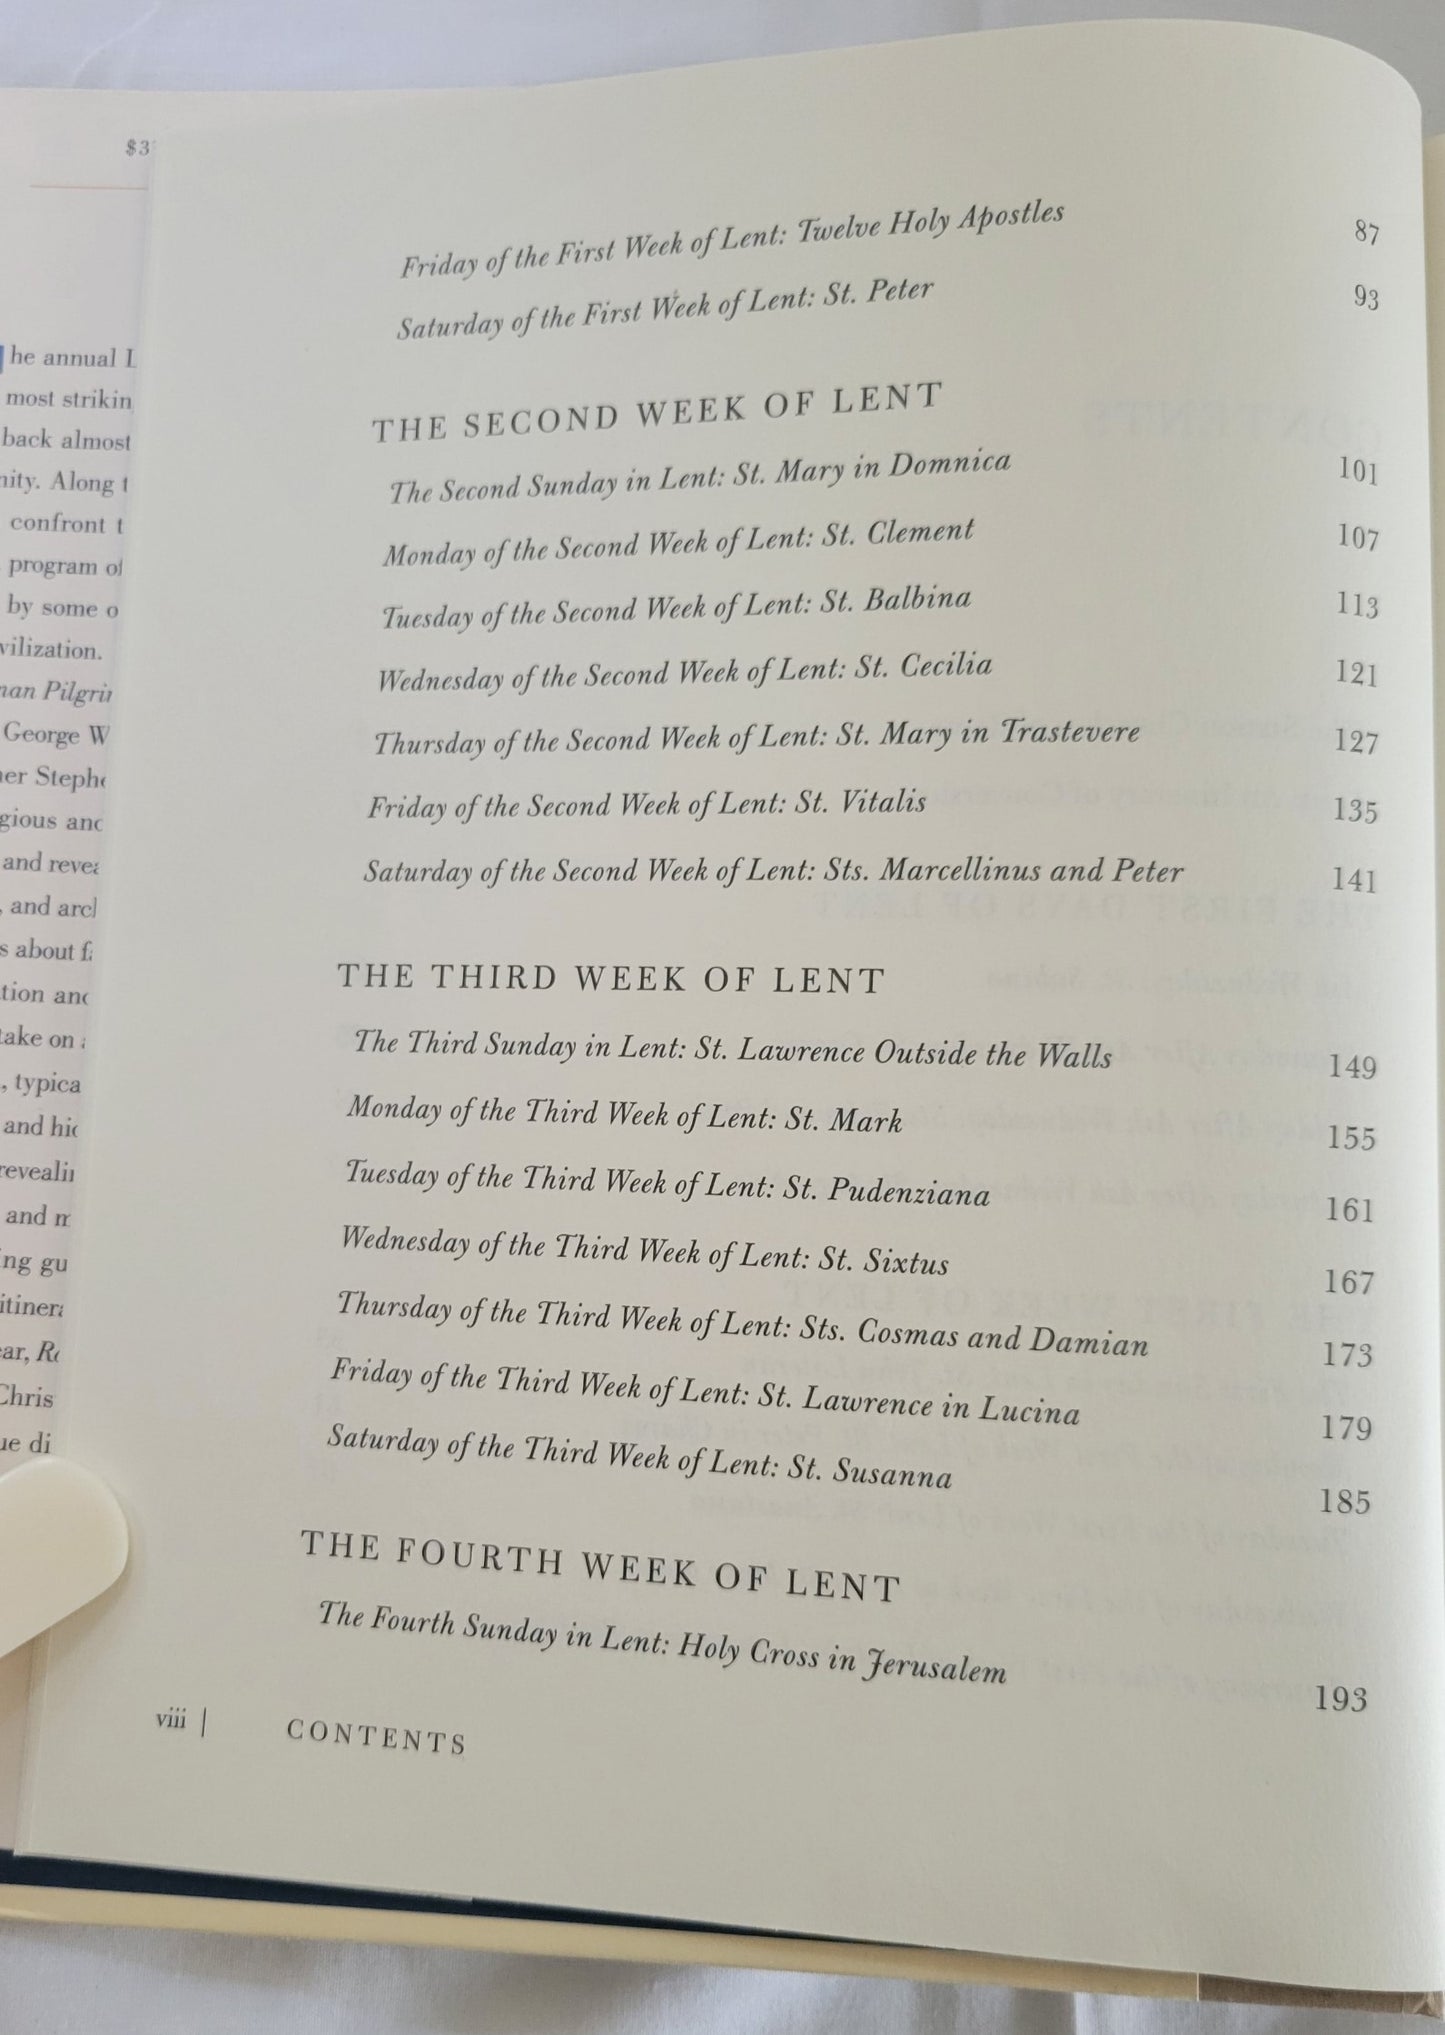 Used book for sale “Roman Pilgrimage: The Station Churches” by George Weigel with Elizabeth Lev and Stephen Weigel. View of table of contents.